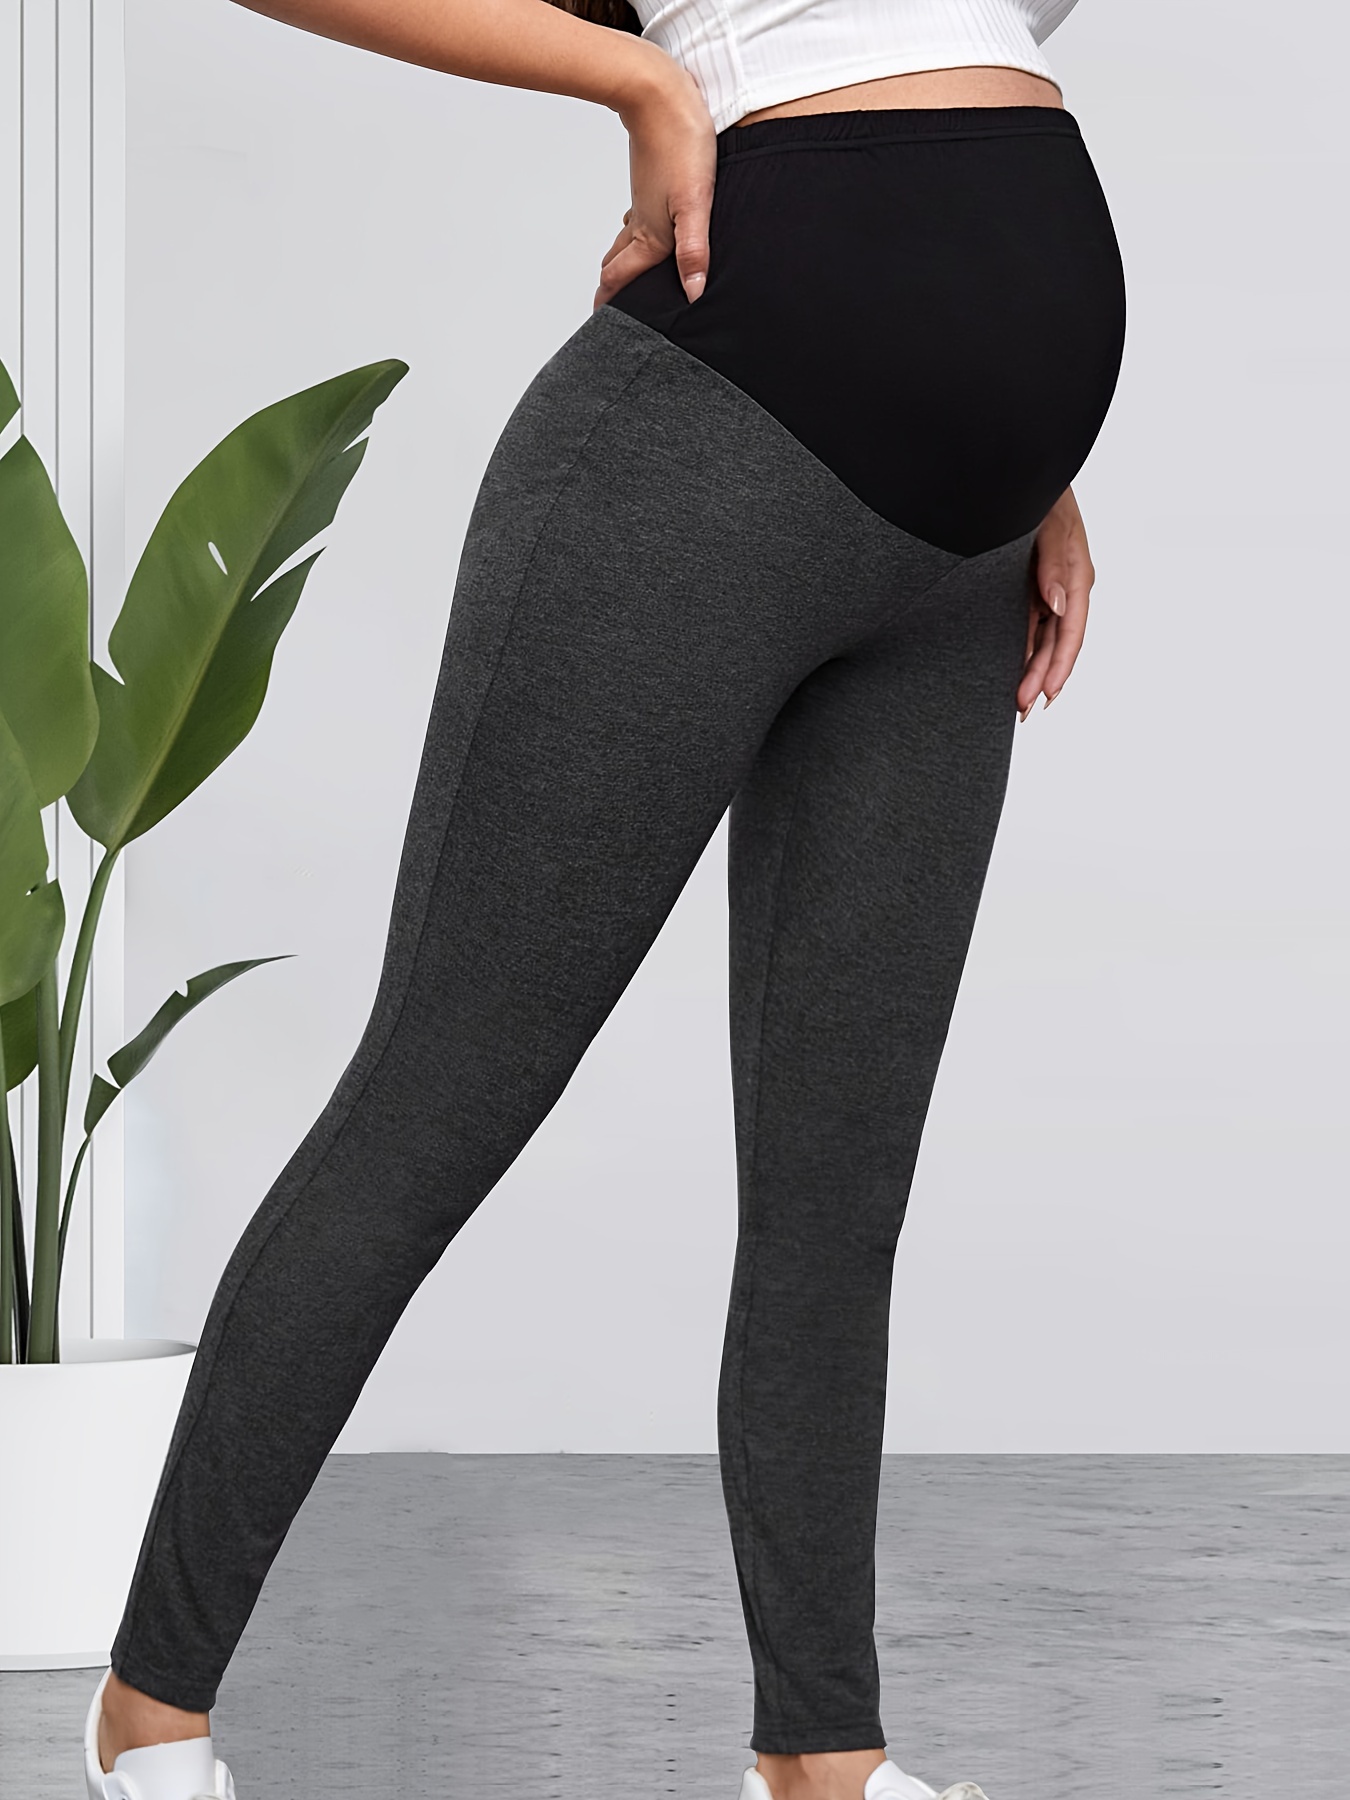 Pregnant Women's Leggings Over The Belly Yoga Workout Maternity Active Pants